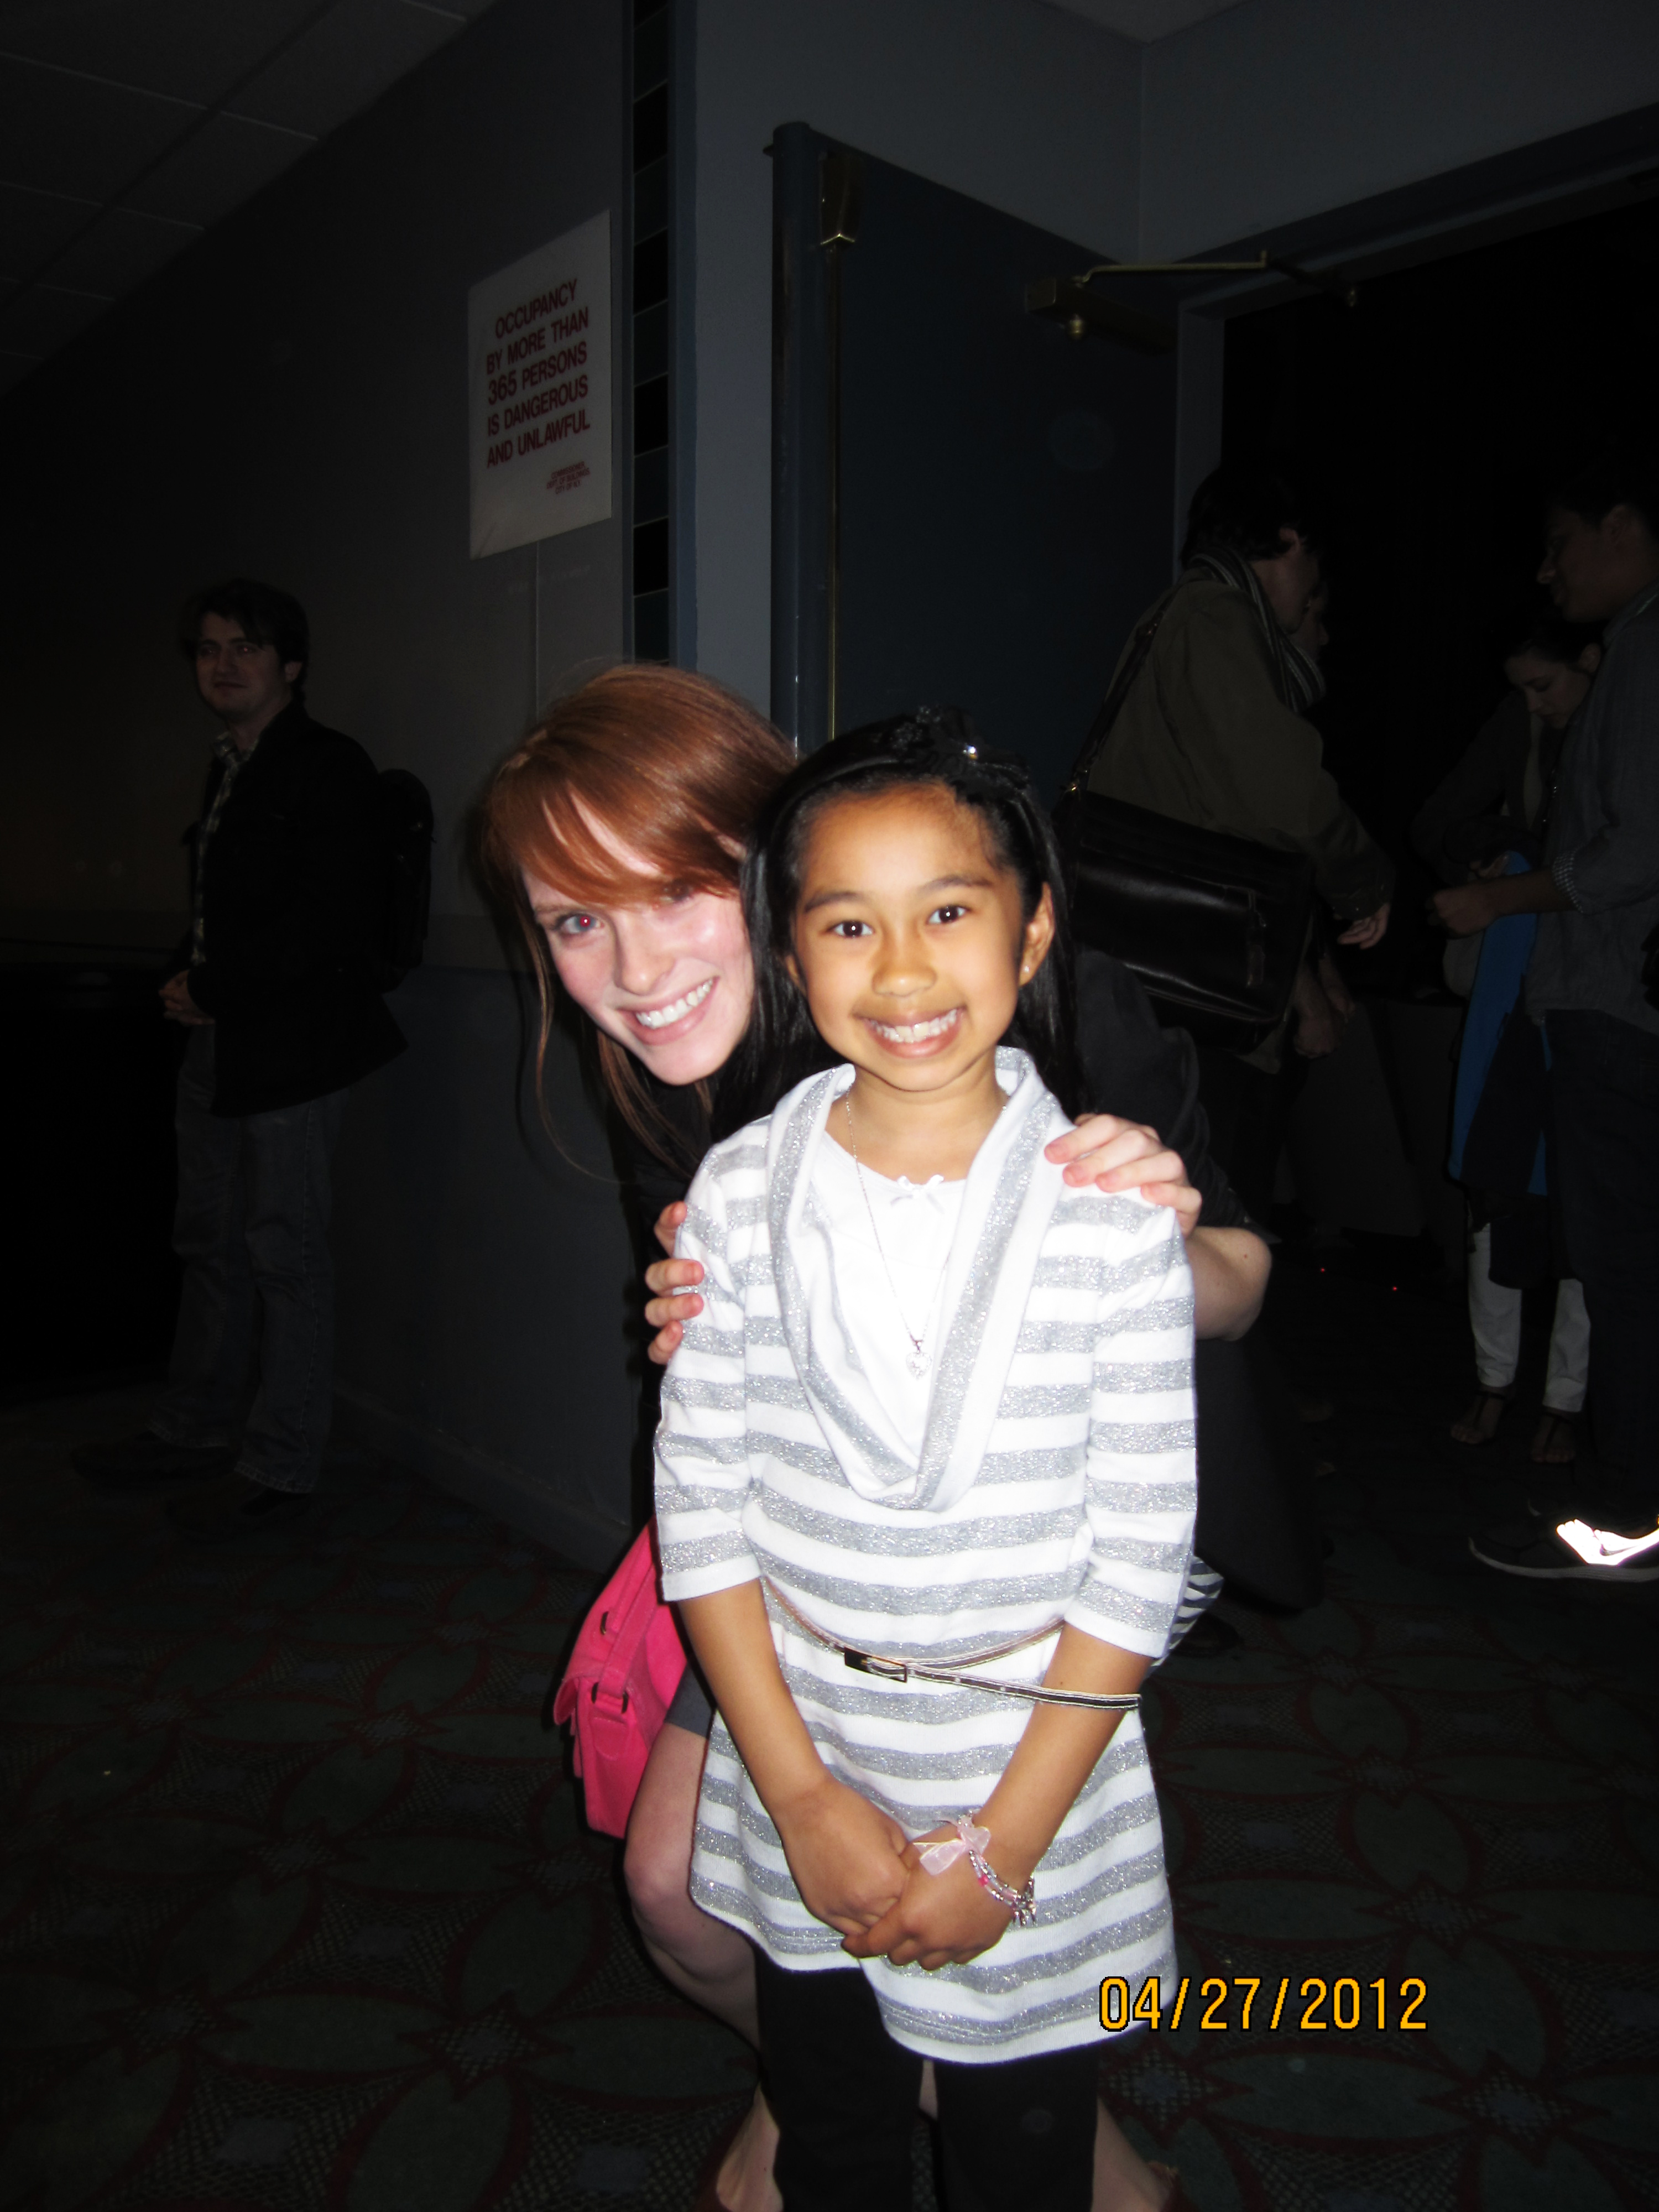 At Tribeca Film Festival with actor Kathleen Littlefield - April 2012